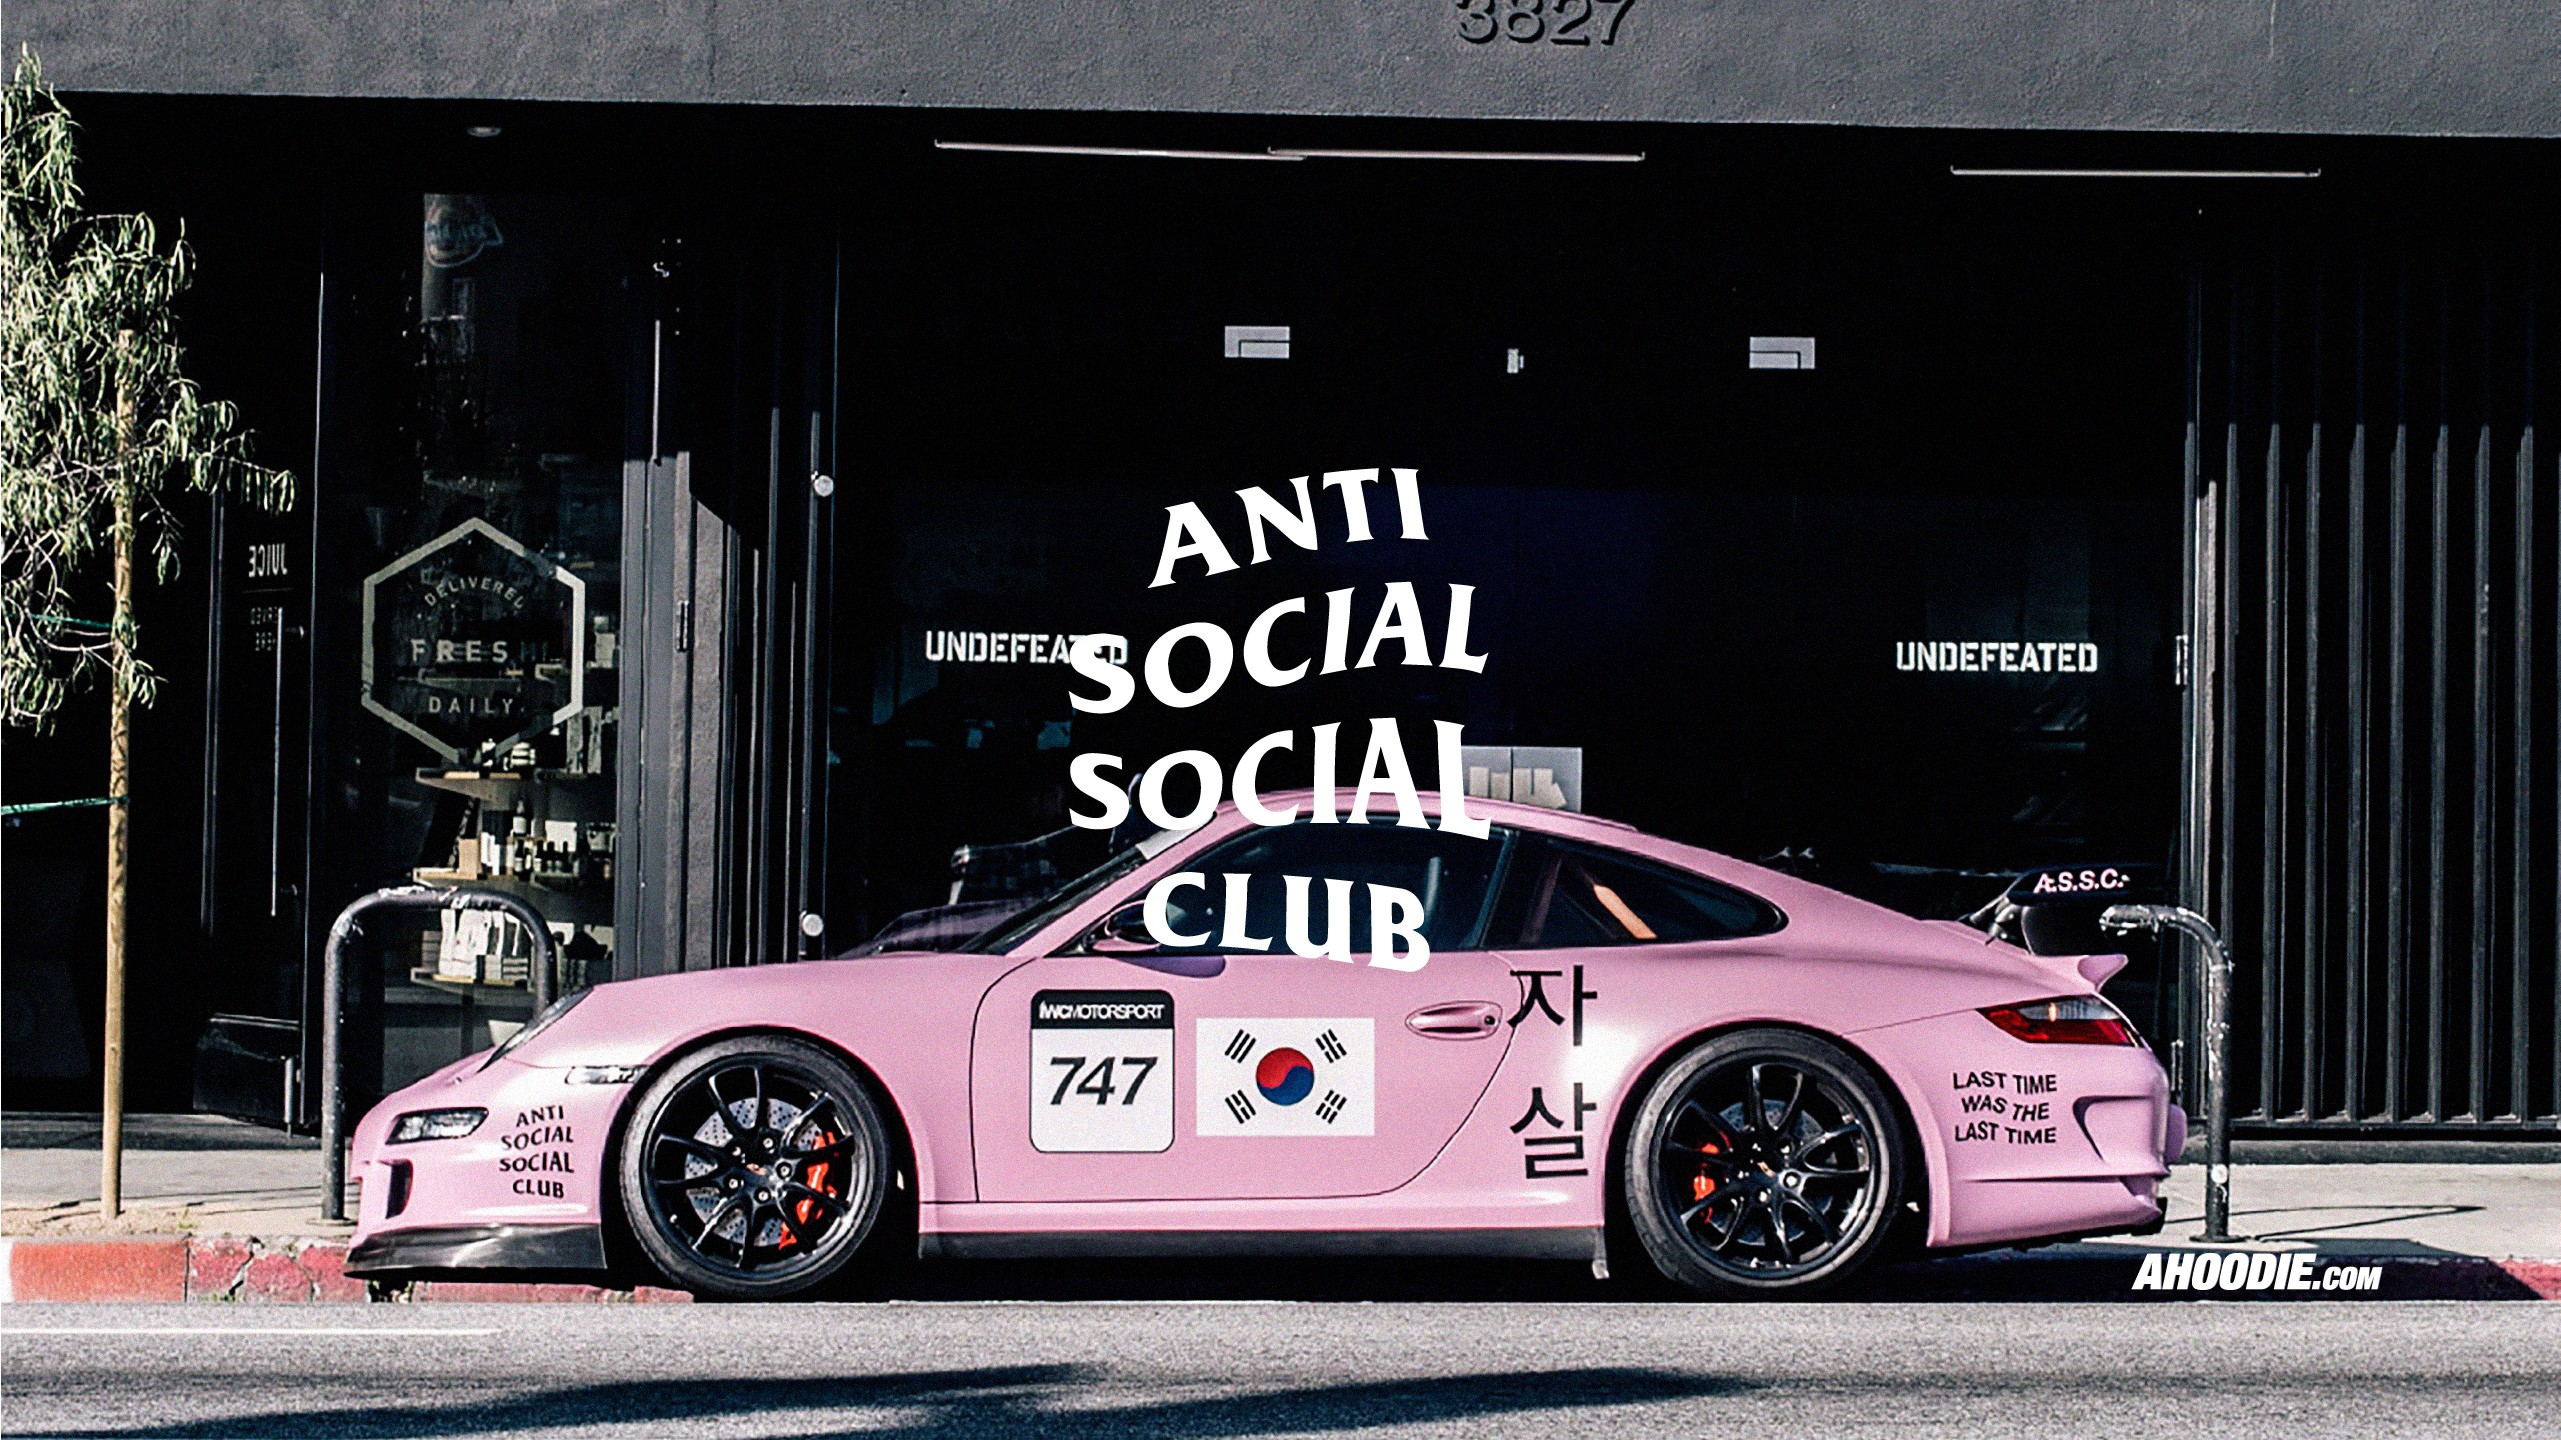 Anti Social Pictures  Download Free Images on Unsplash